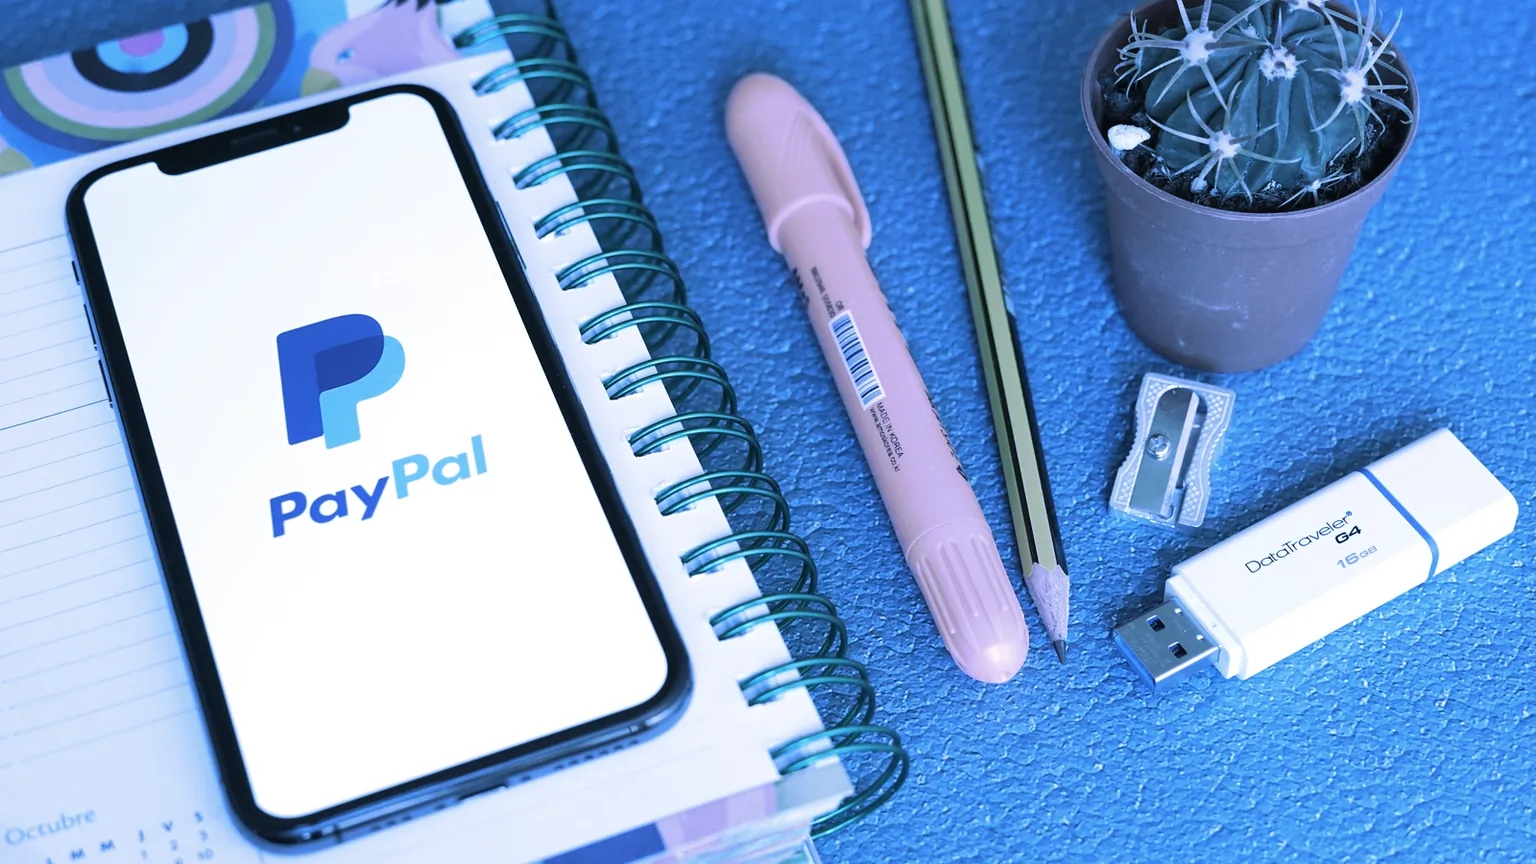 PayPal is used for sending money around the world. Image: Shutterstock.